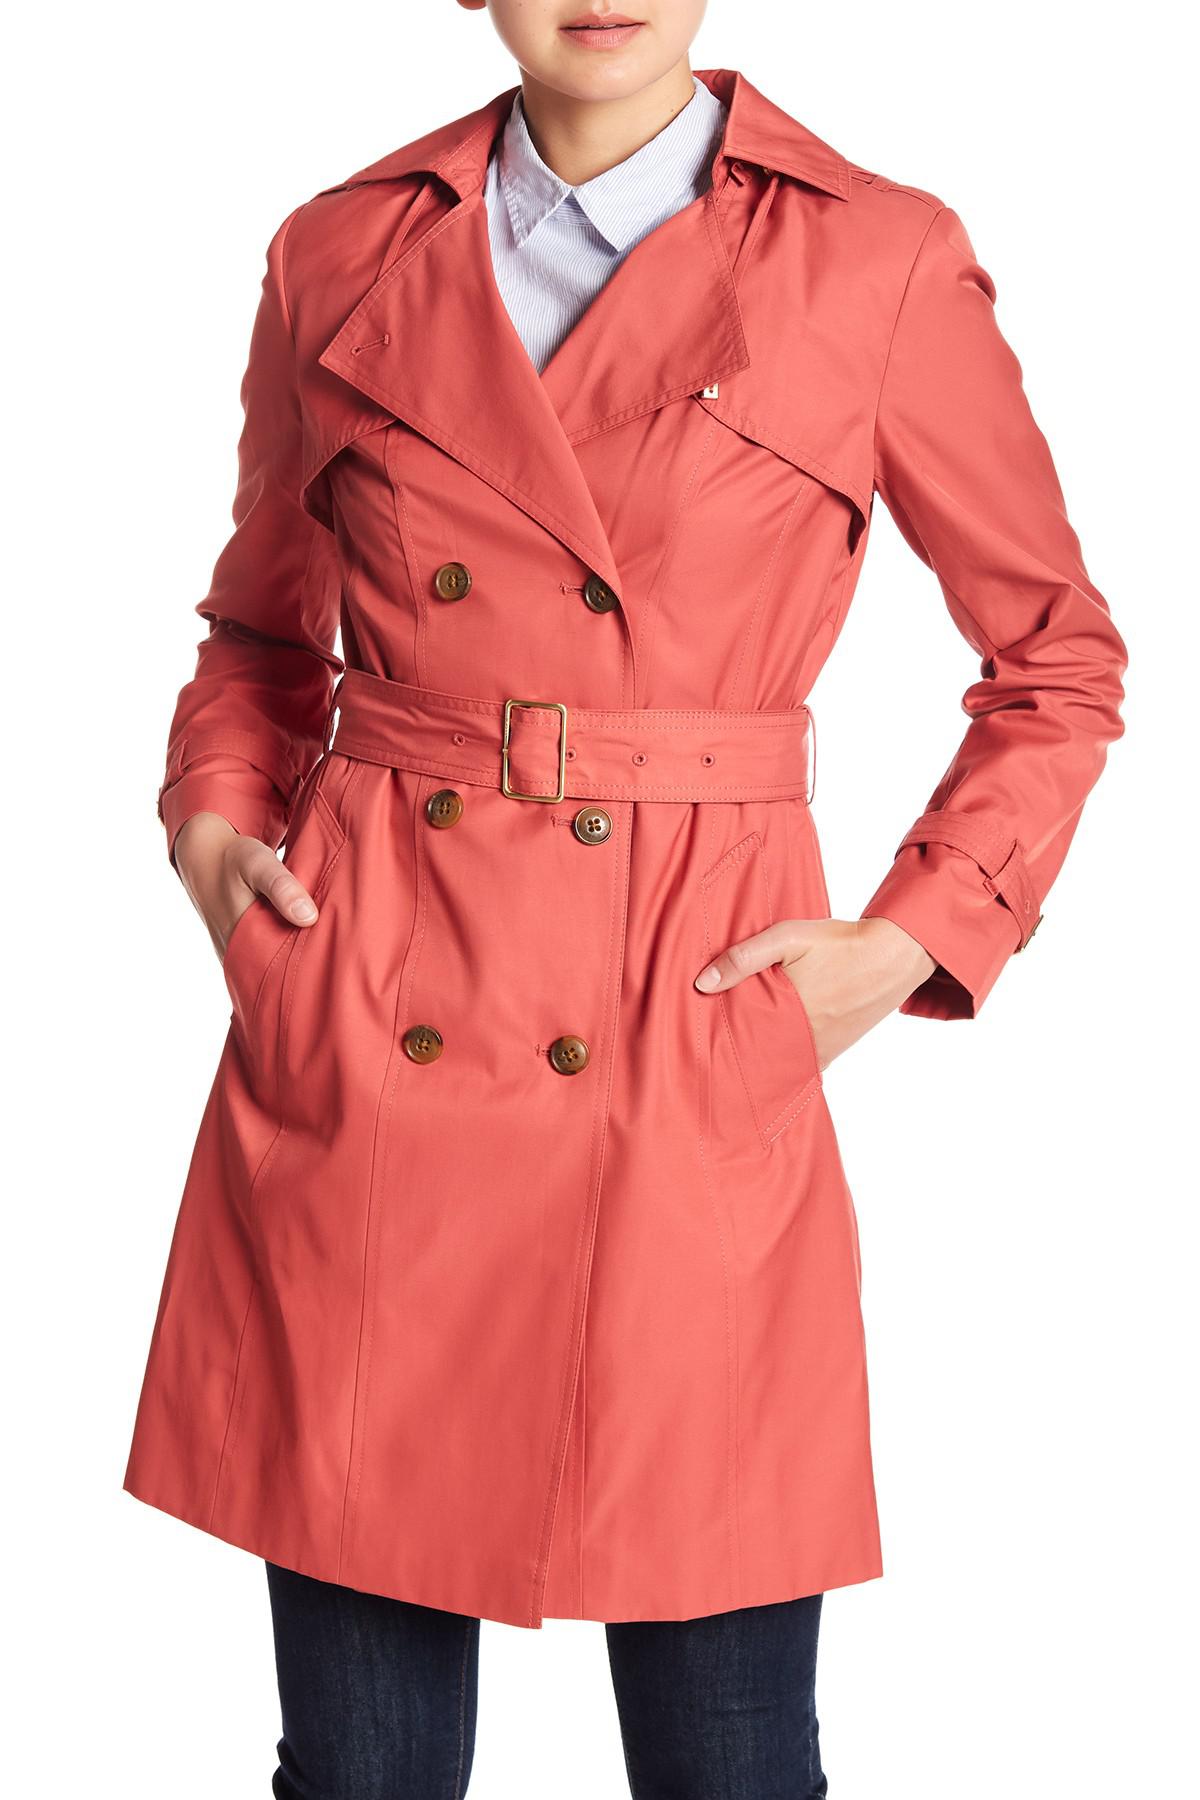 Lyst - Cole Haan Belted Trench Coat in Red